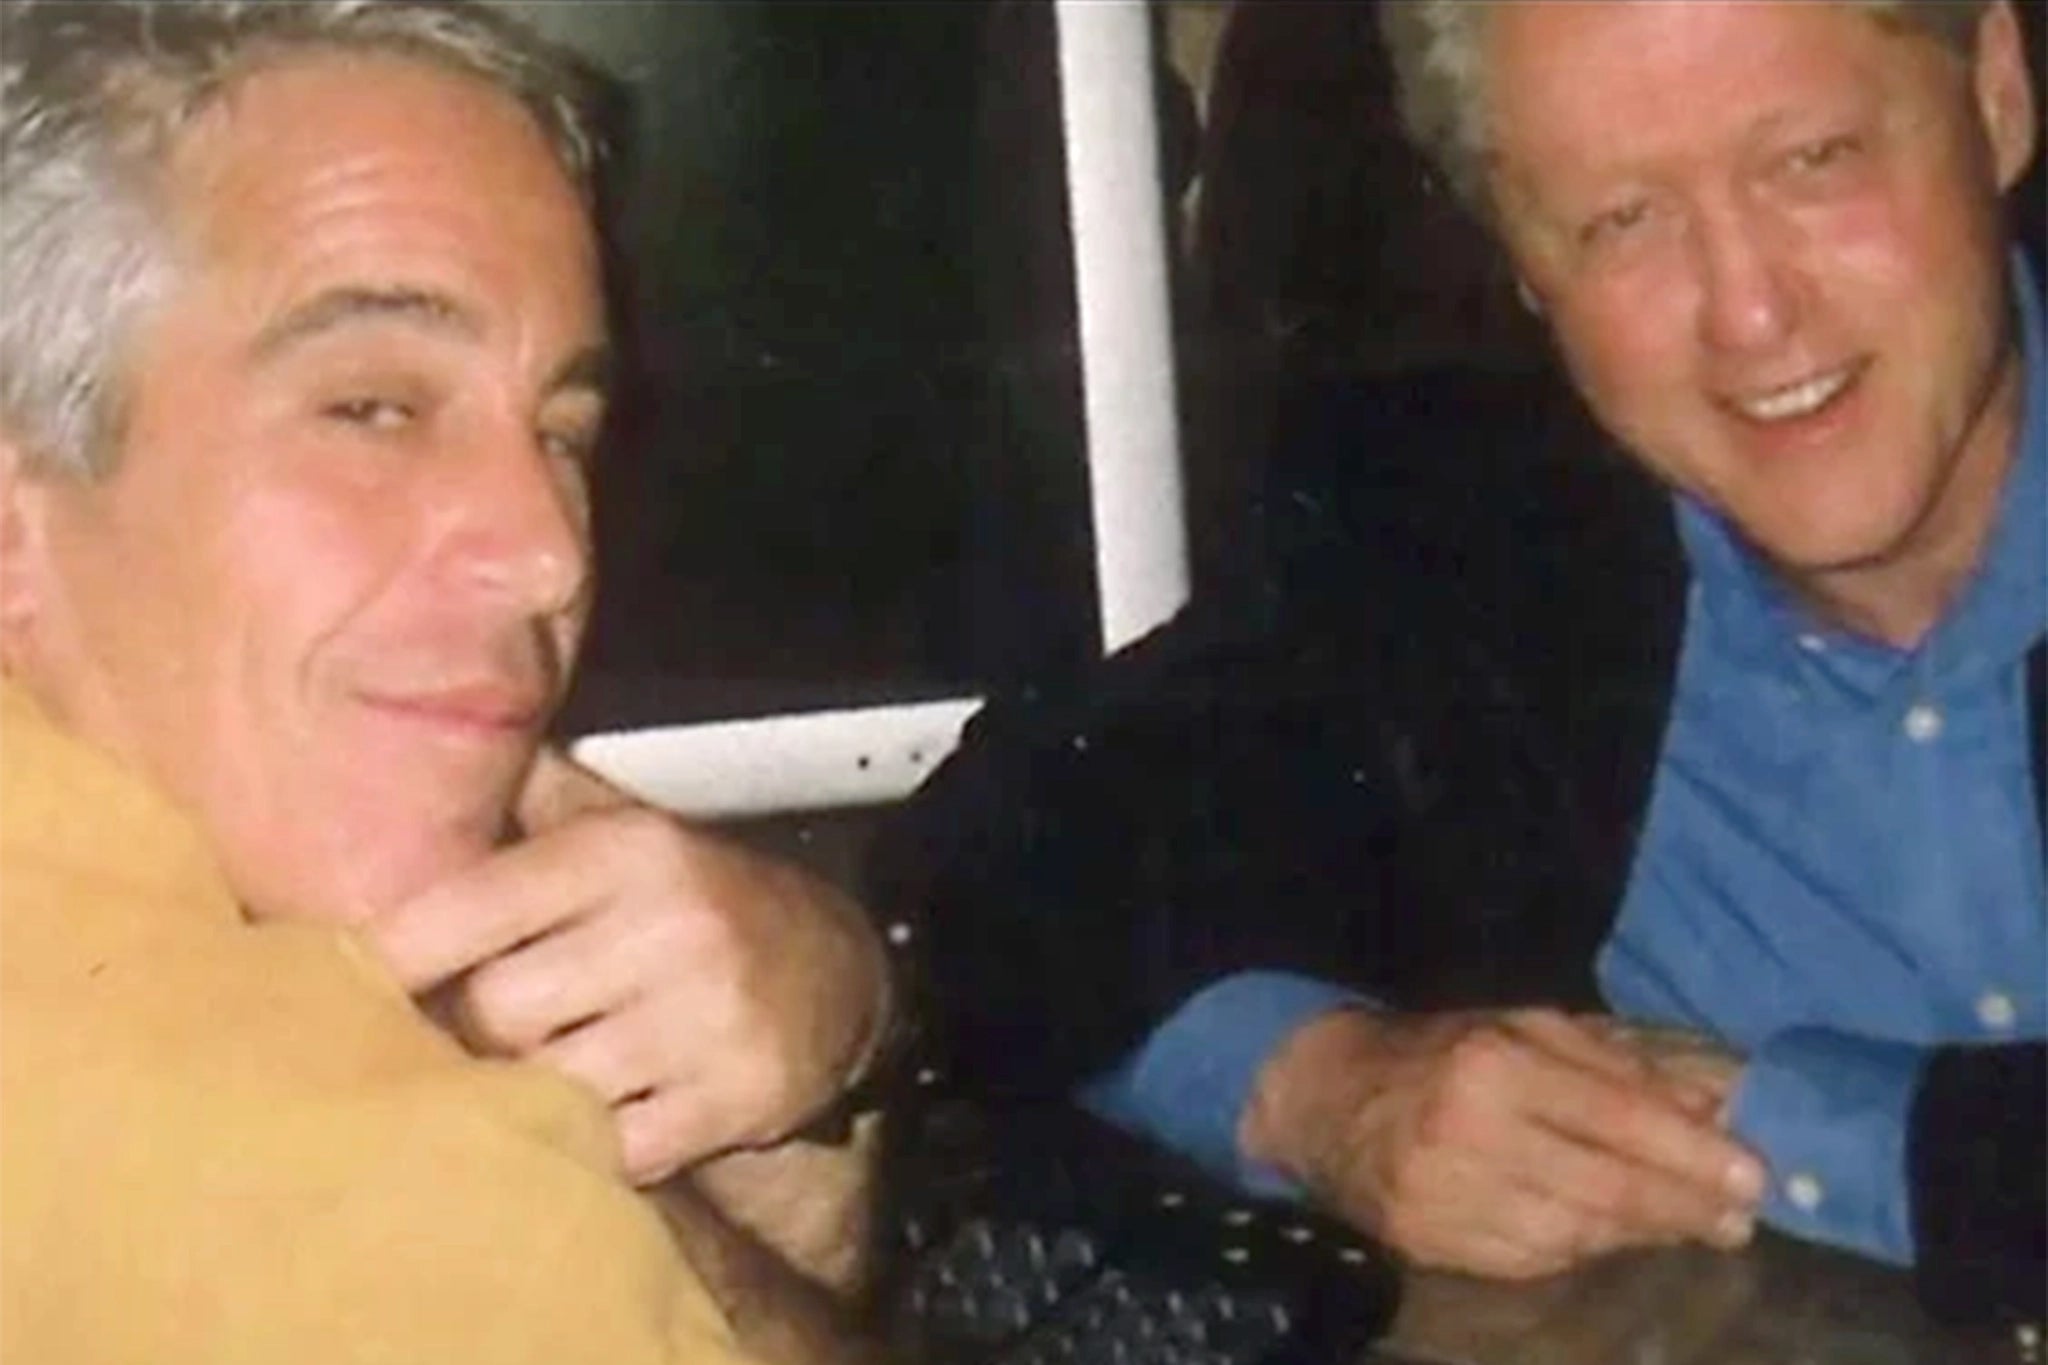 Former US president Bill Clinton features heavily in the documents released so far